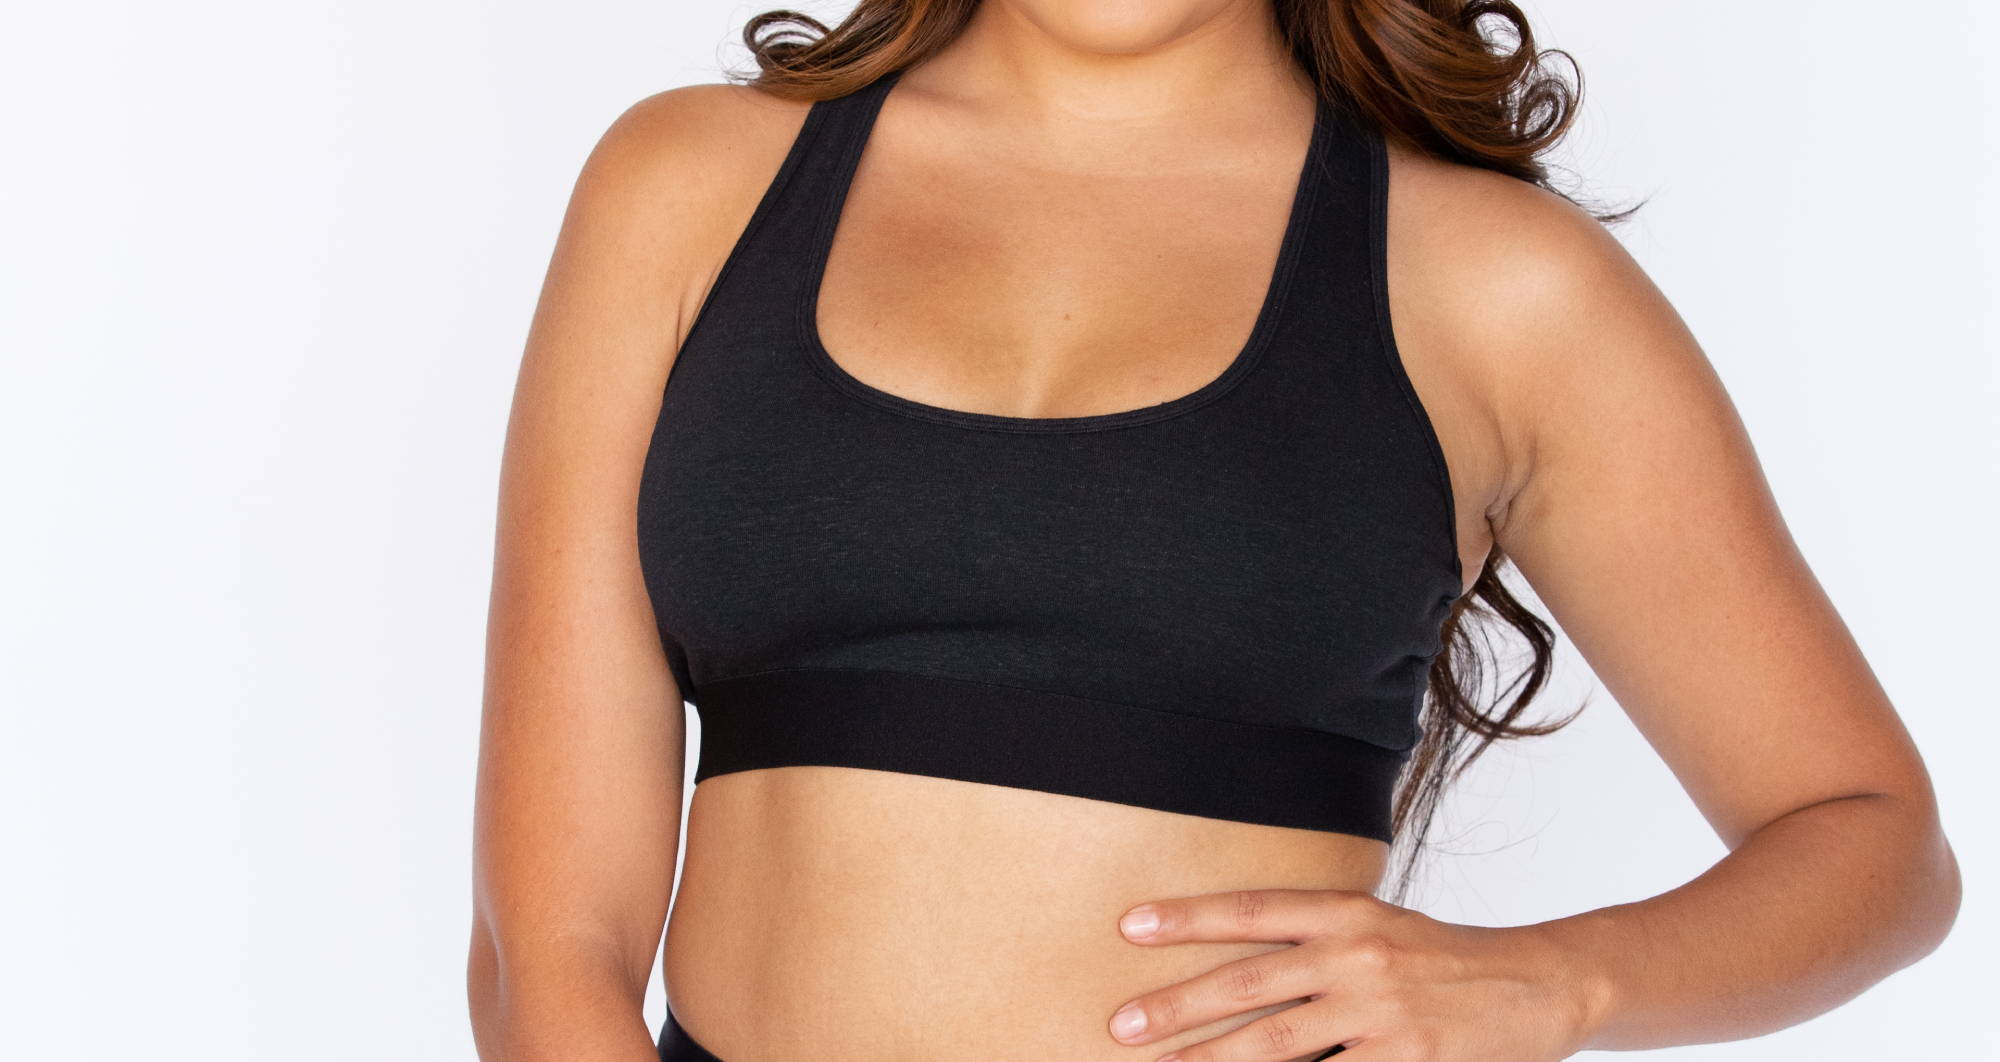 Average Bra Size In The US: 10 Things To Know – WAMA Underwear